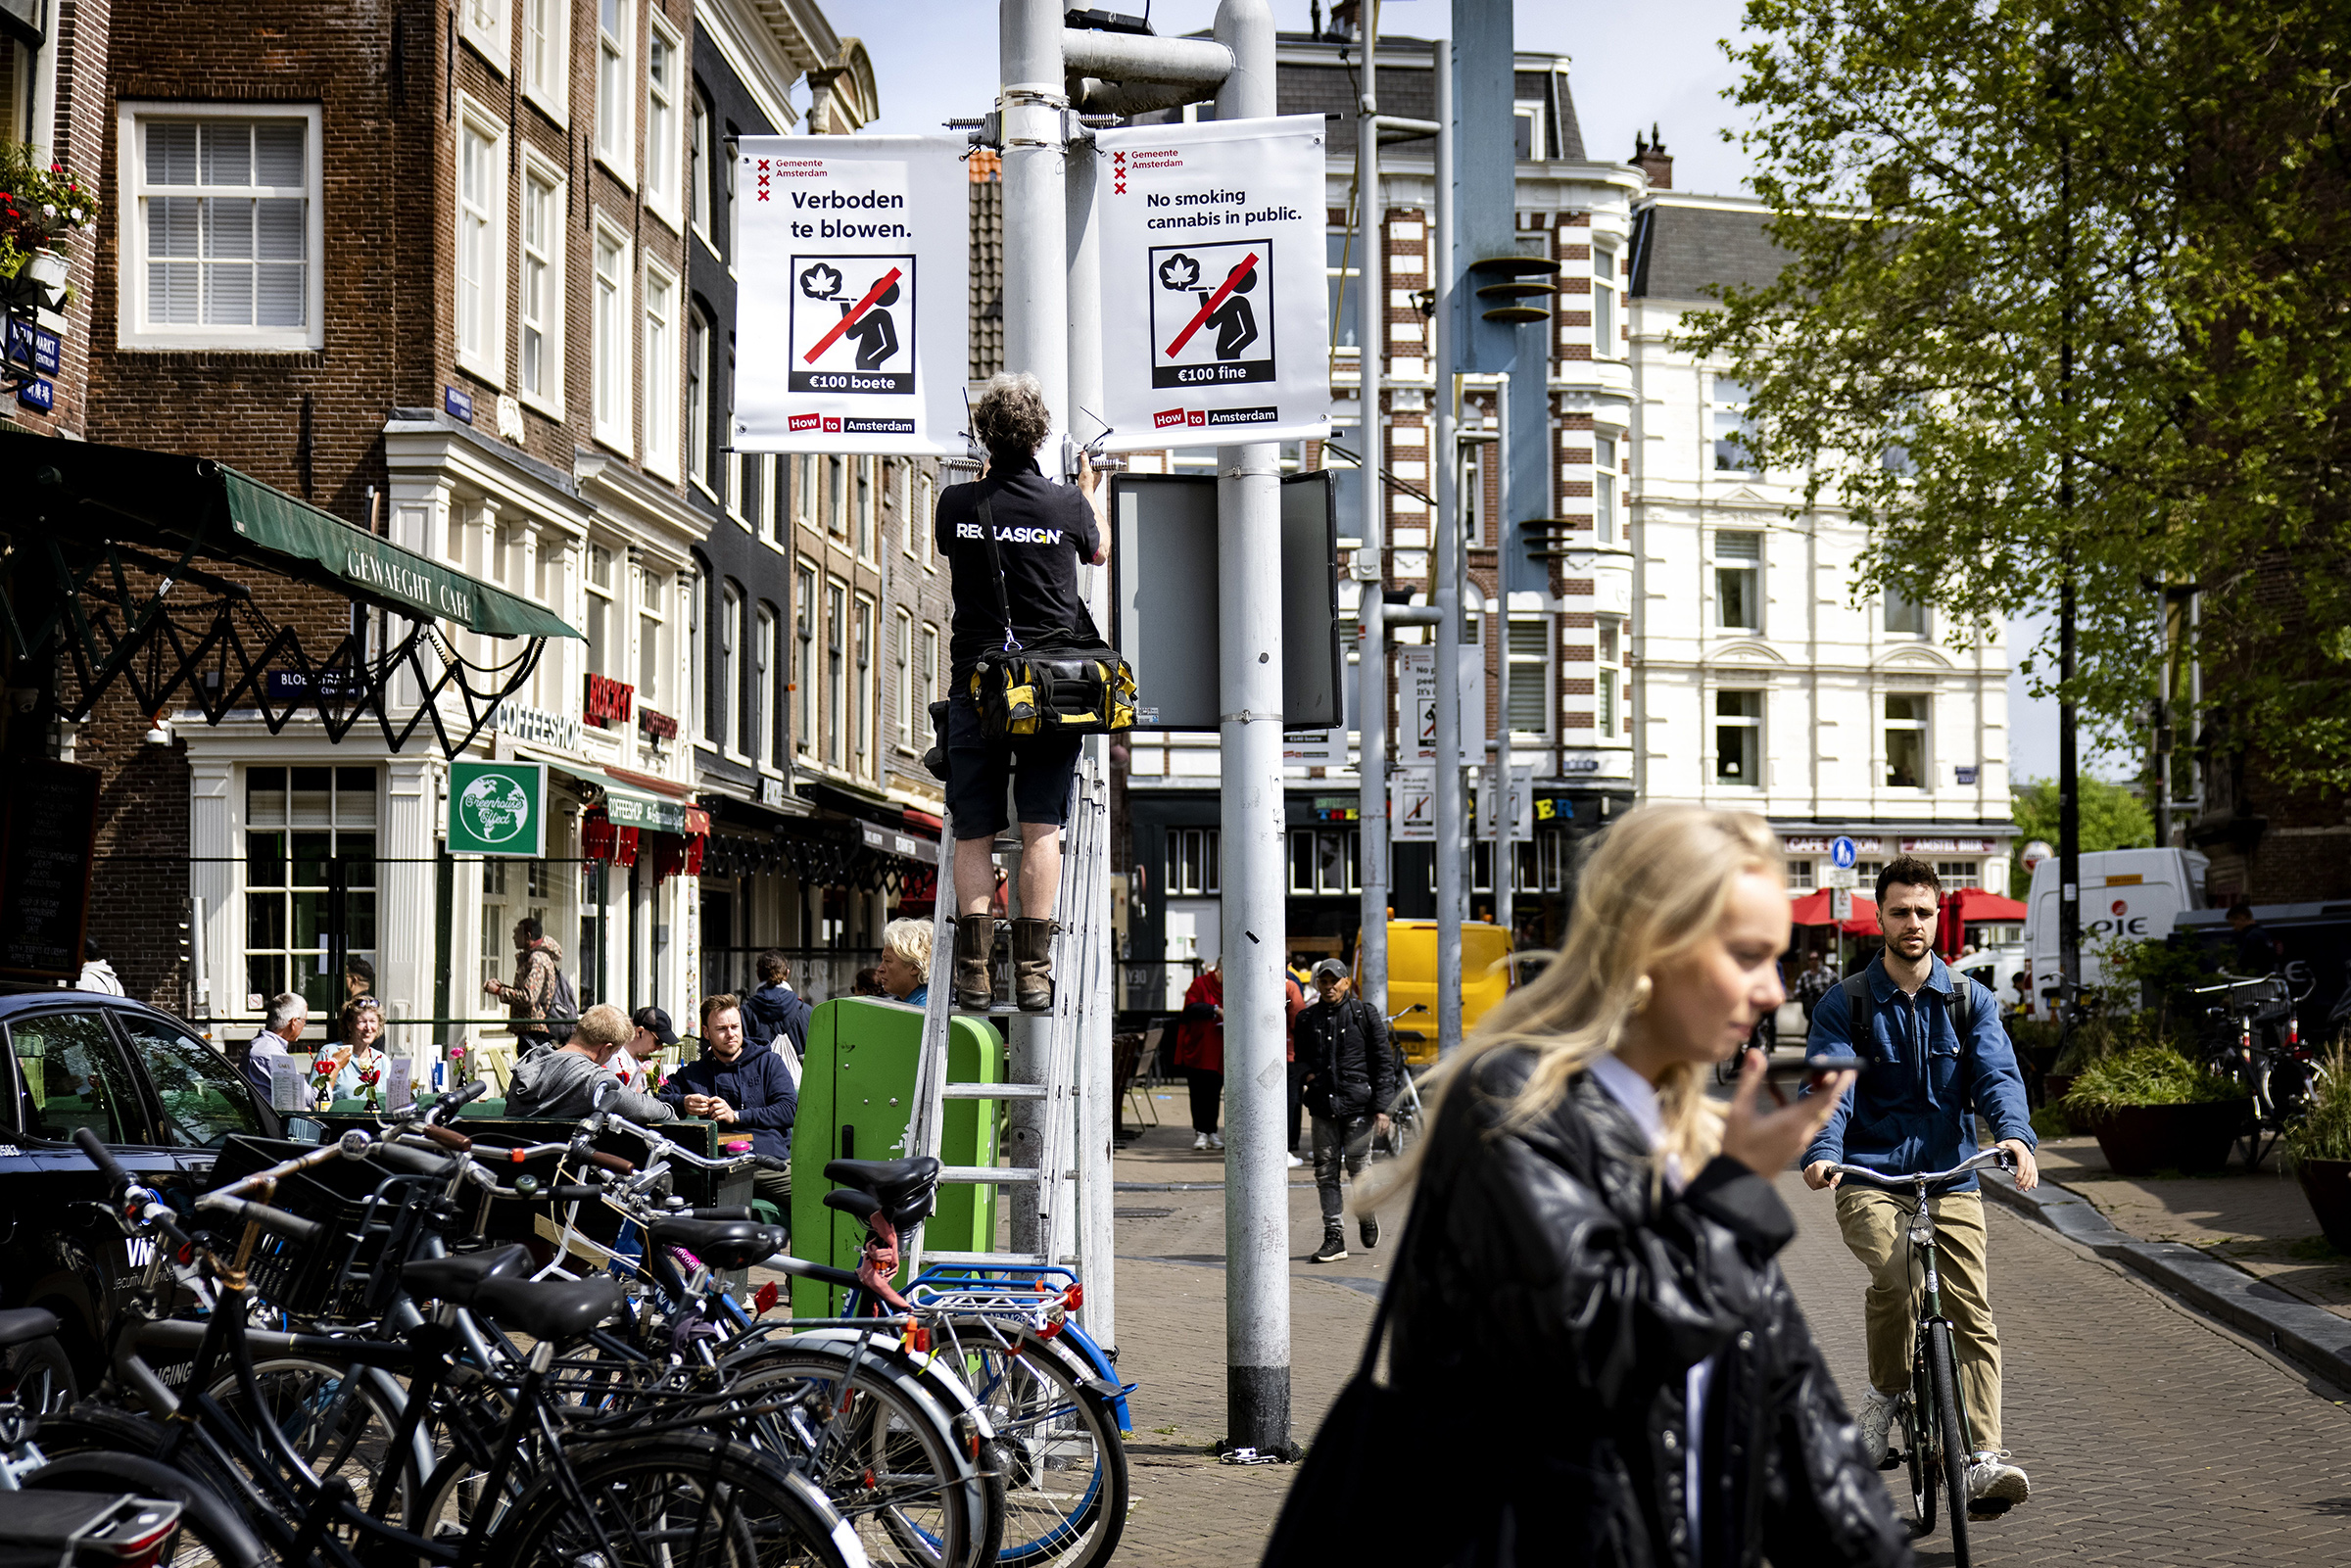 An employee of the municipality places a prohibition sign on the Nieuwmarkt on May 23. From May 25, it is forbidden to smoke weed in the old city center of Amsterdam. (Hollandse Hoogte—Shutterstock)